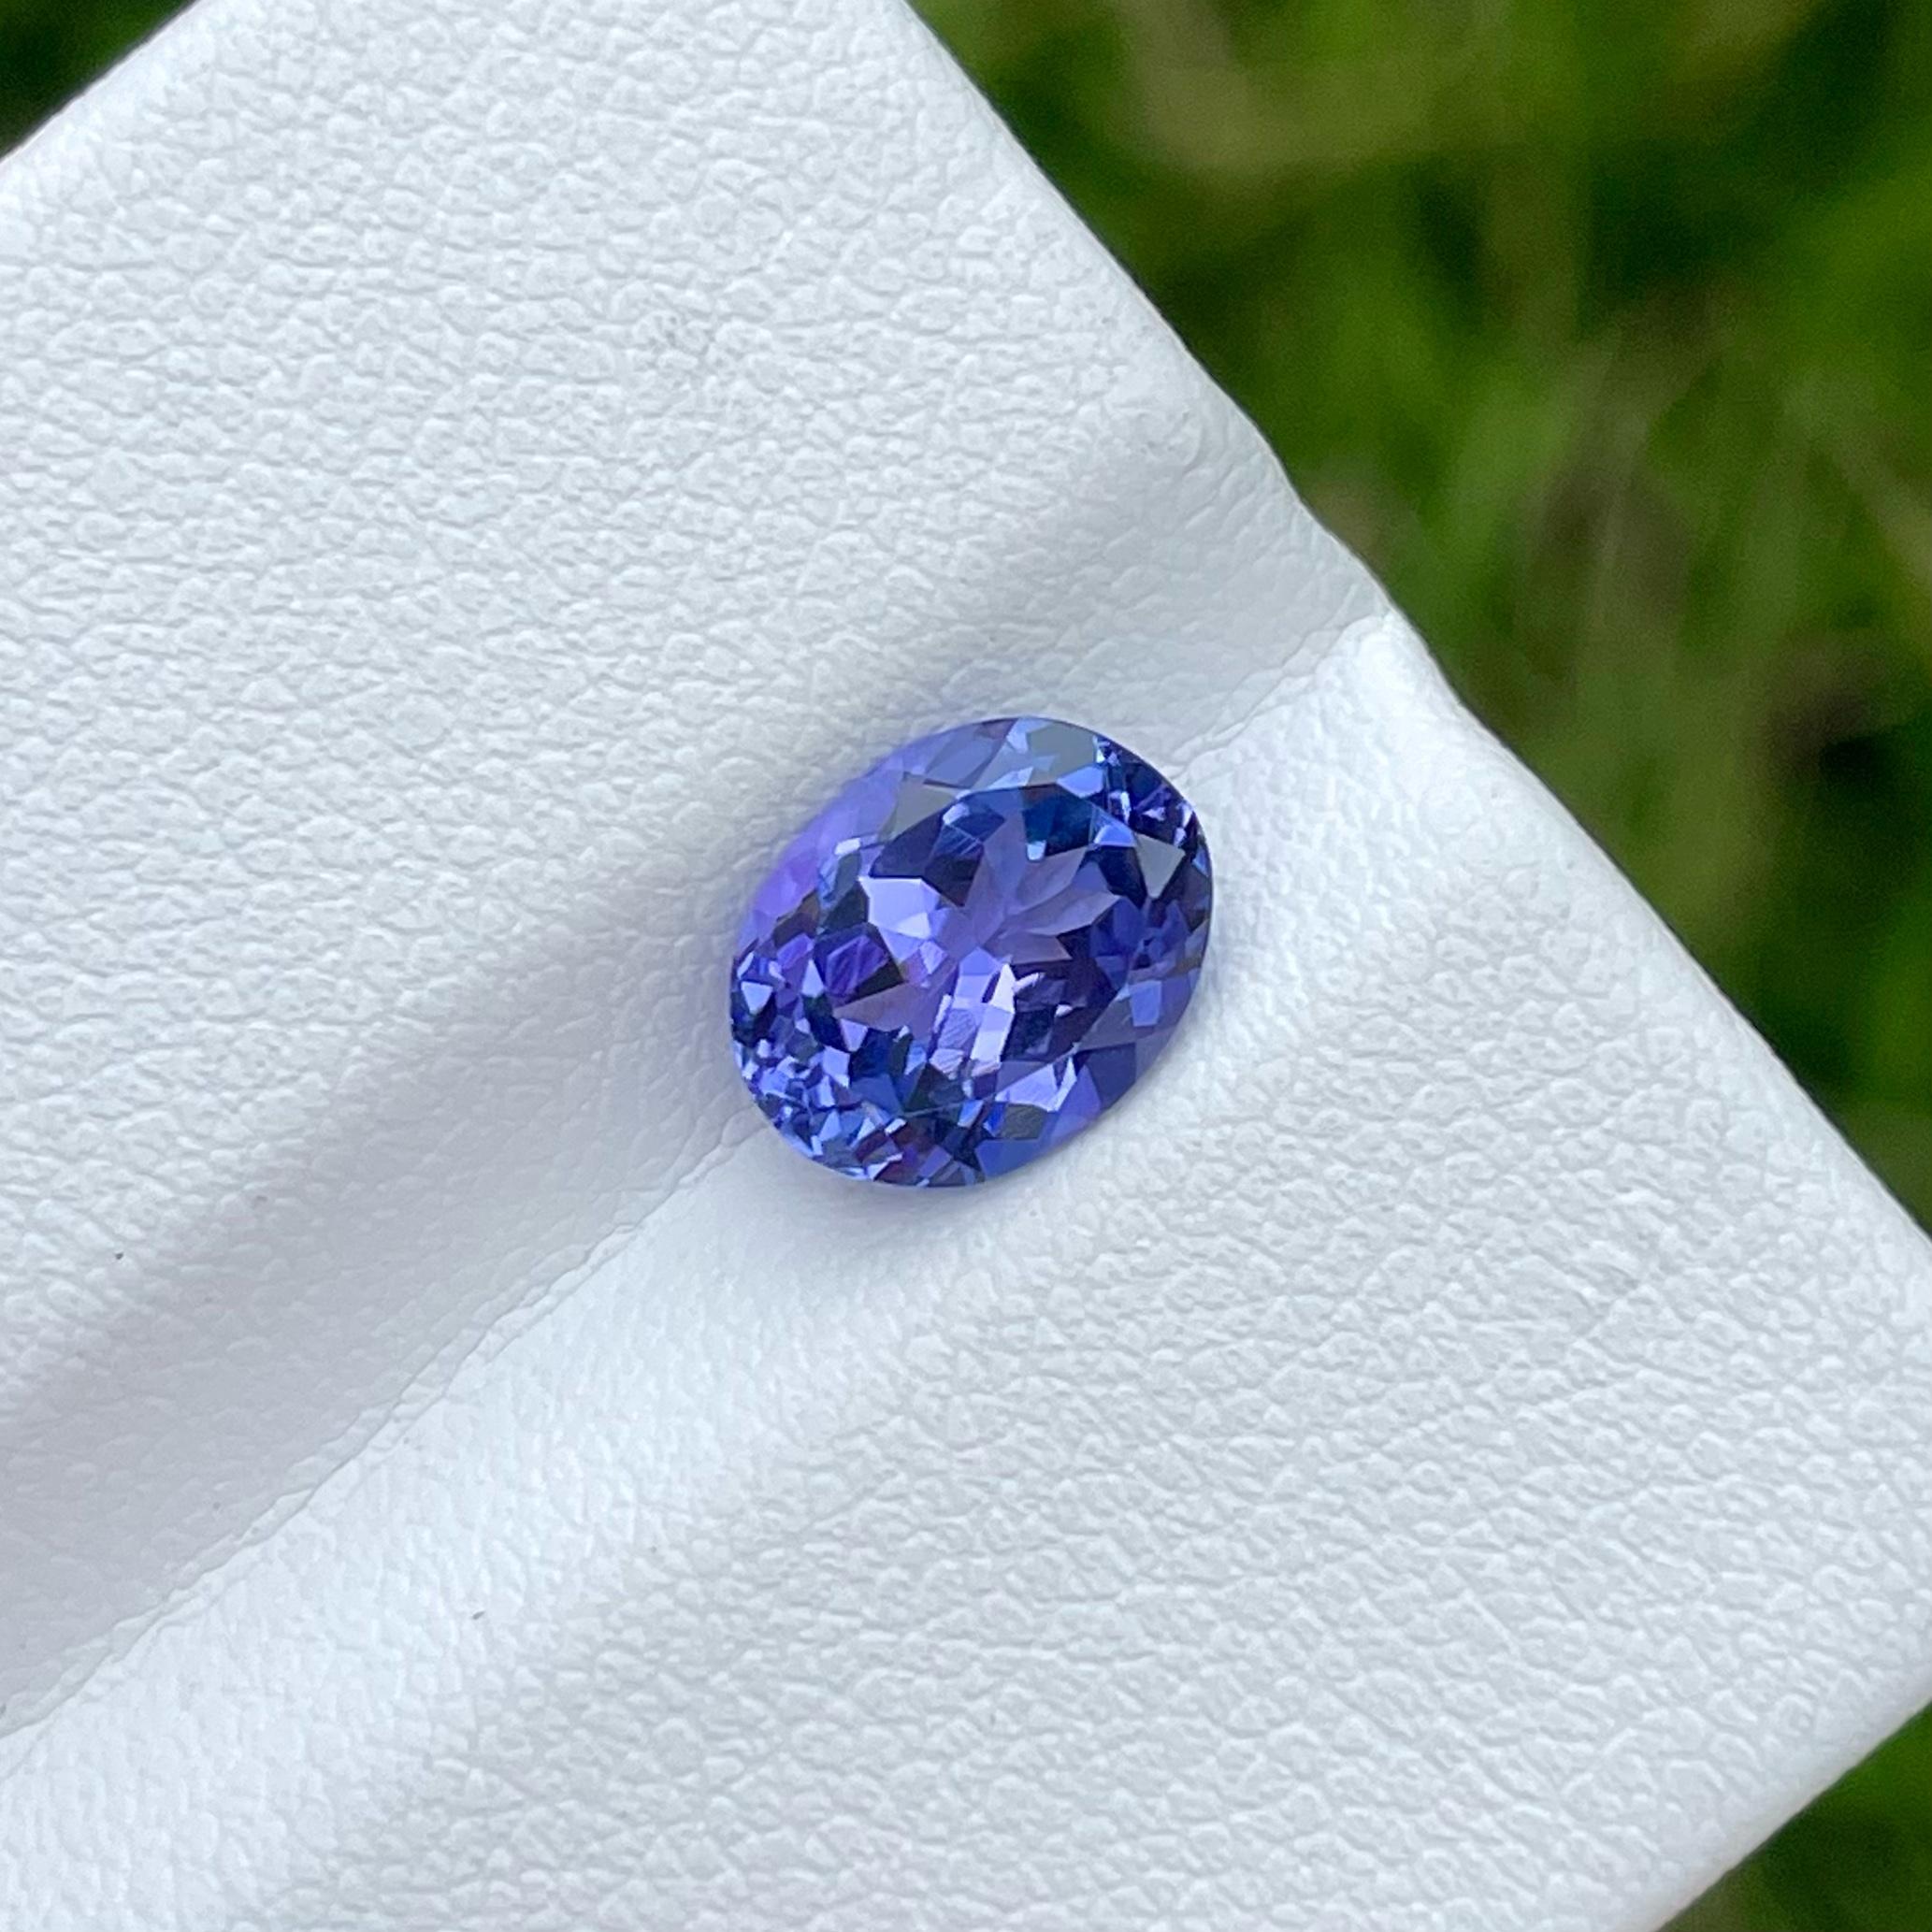 Weight 2.10 carats 
Dimensions 9 x 7 x 5 mm 
Treatment Heated 
Origin Tanzania 
Clarity Loupe Clean 
Shape Oval
Cut Fancy Oval


The Blue AA+ Grade Tanzanite is a natural gemstone known for its exquisite blue-violet color. Tanzanite is a variety of